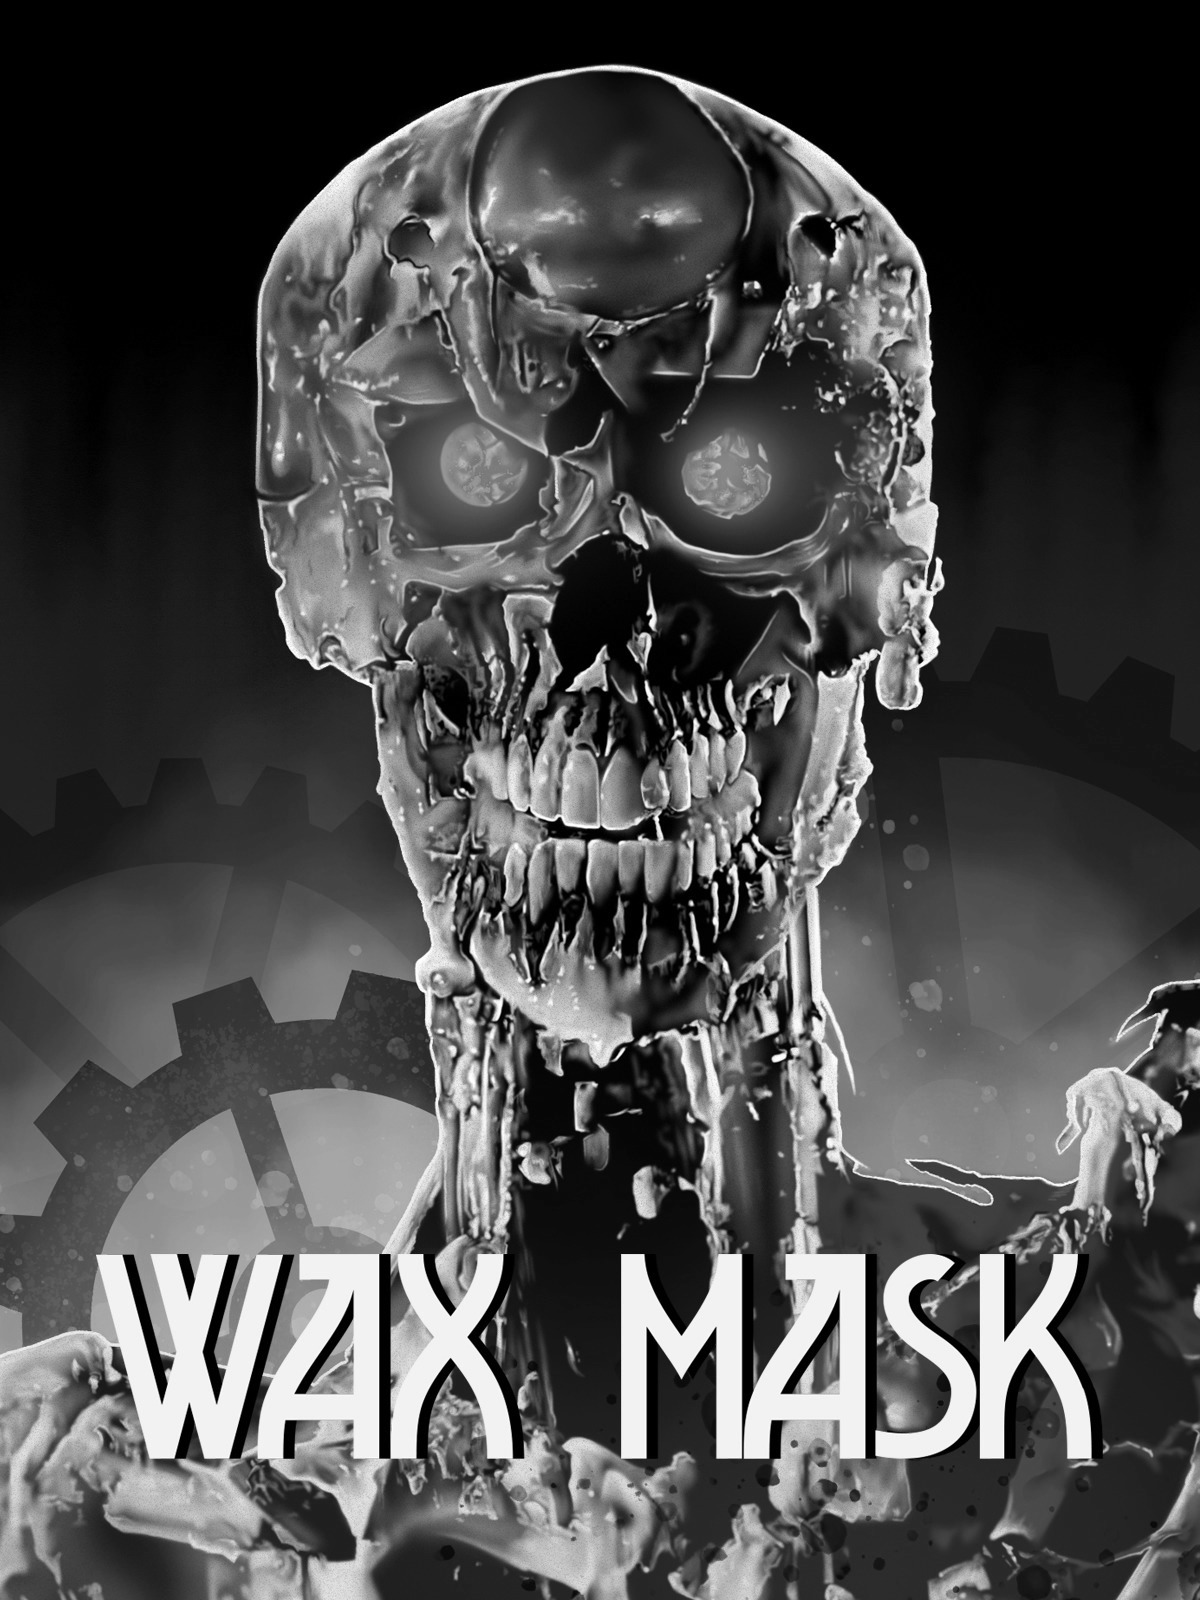 The Vax Mask